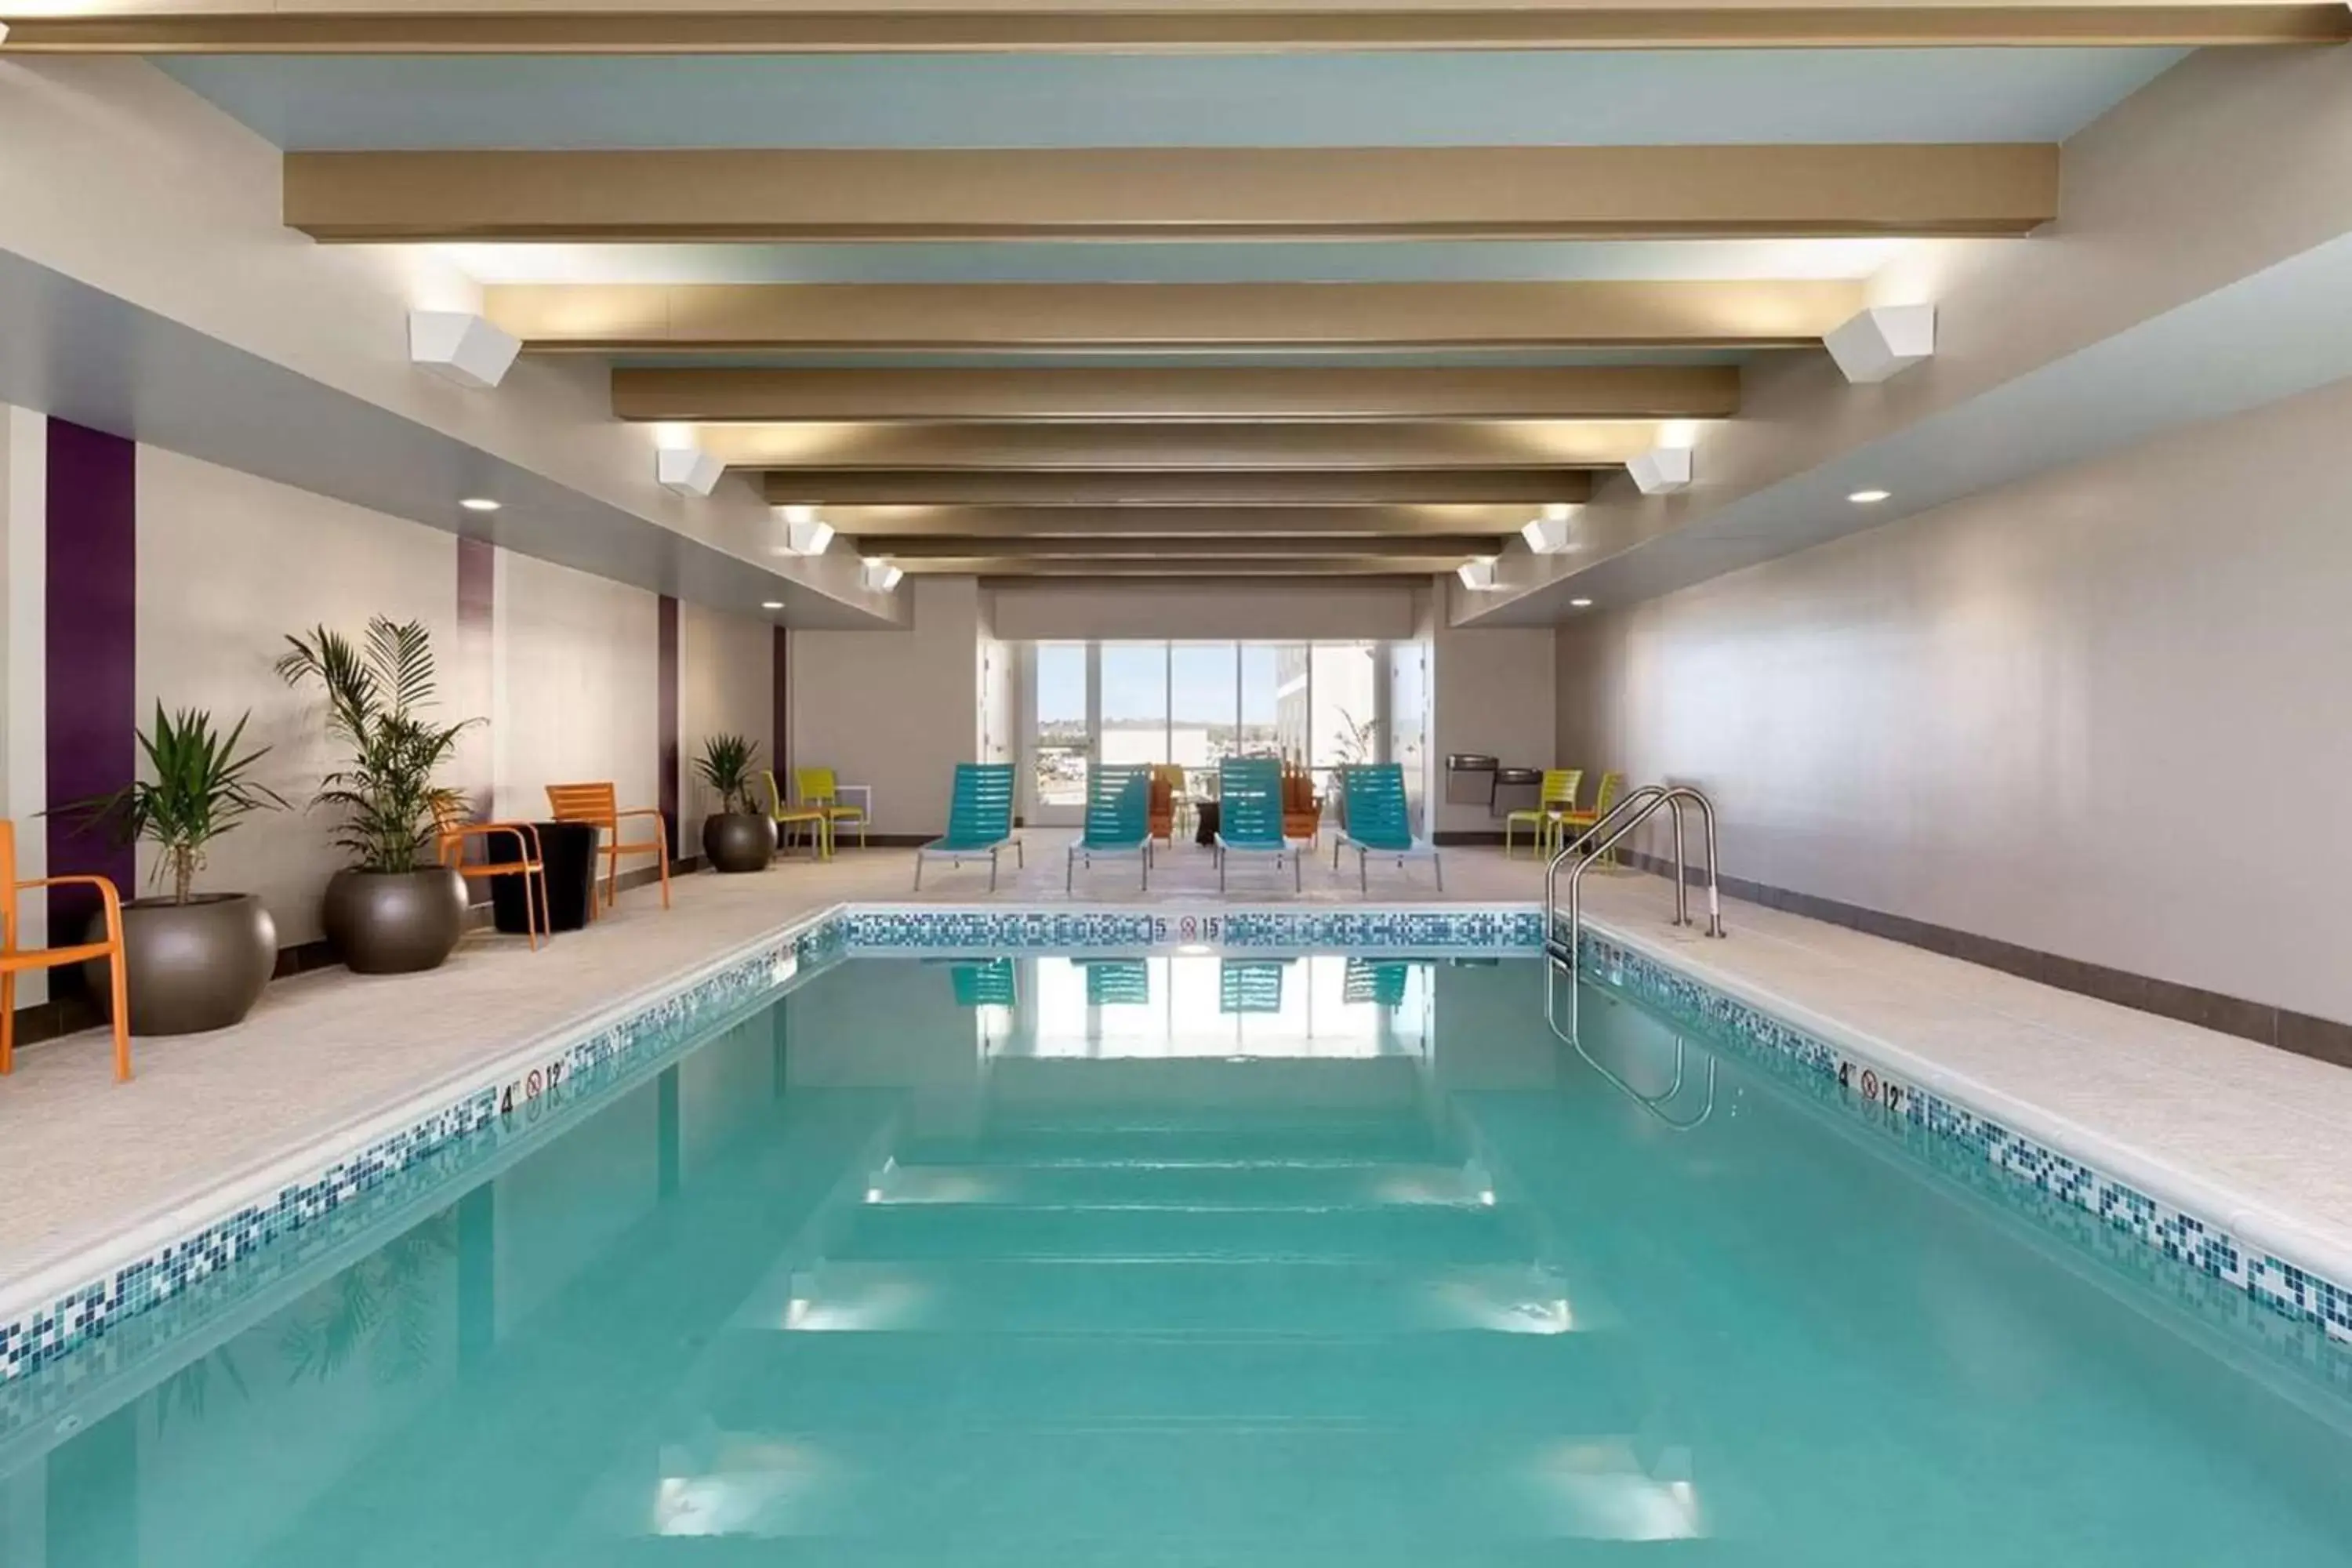 Swimming Pool in Home2 Suites Troy, OH